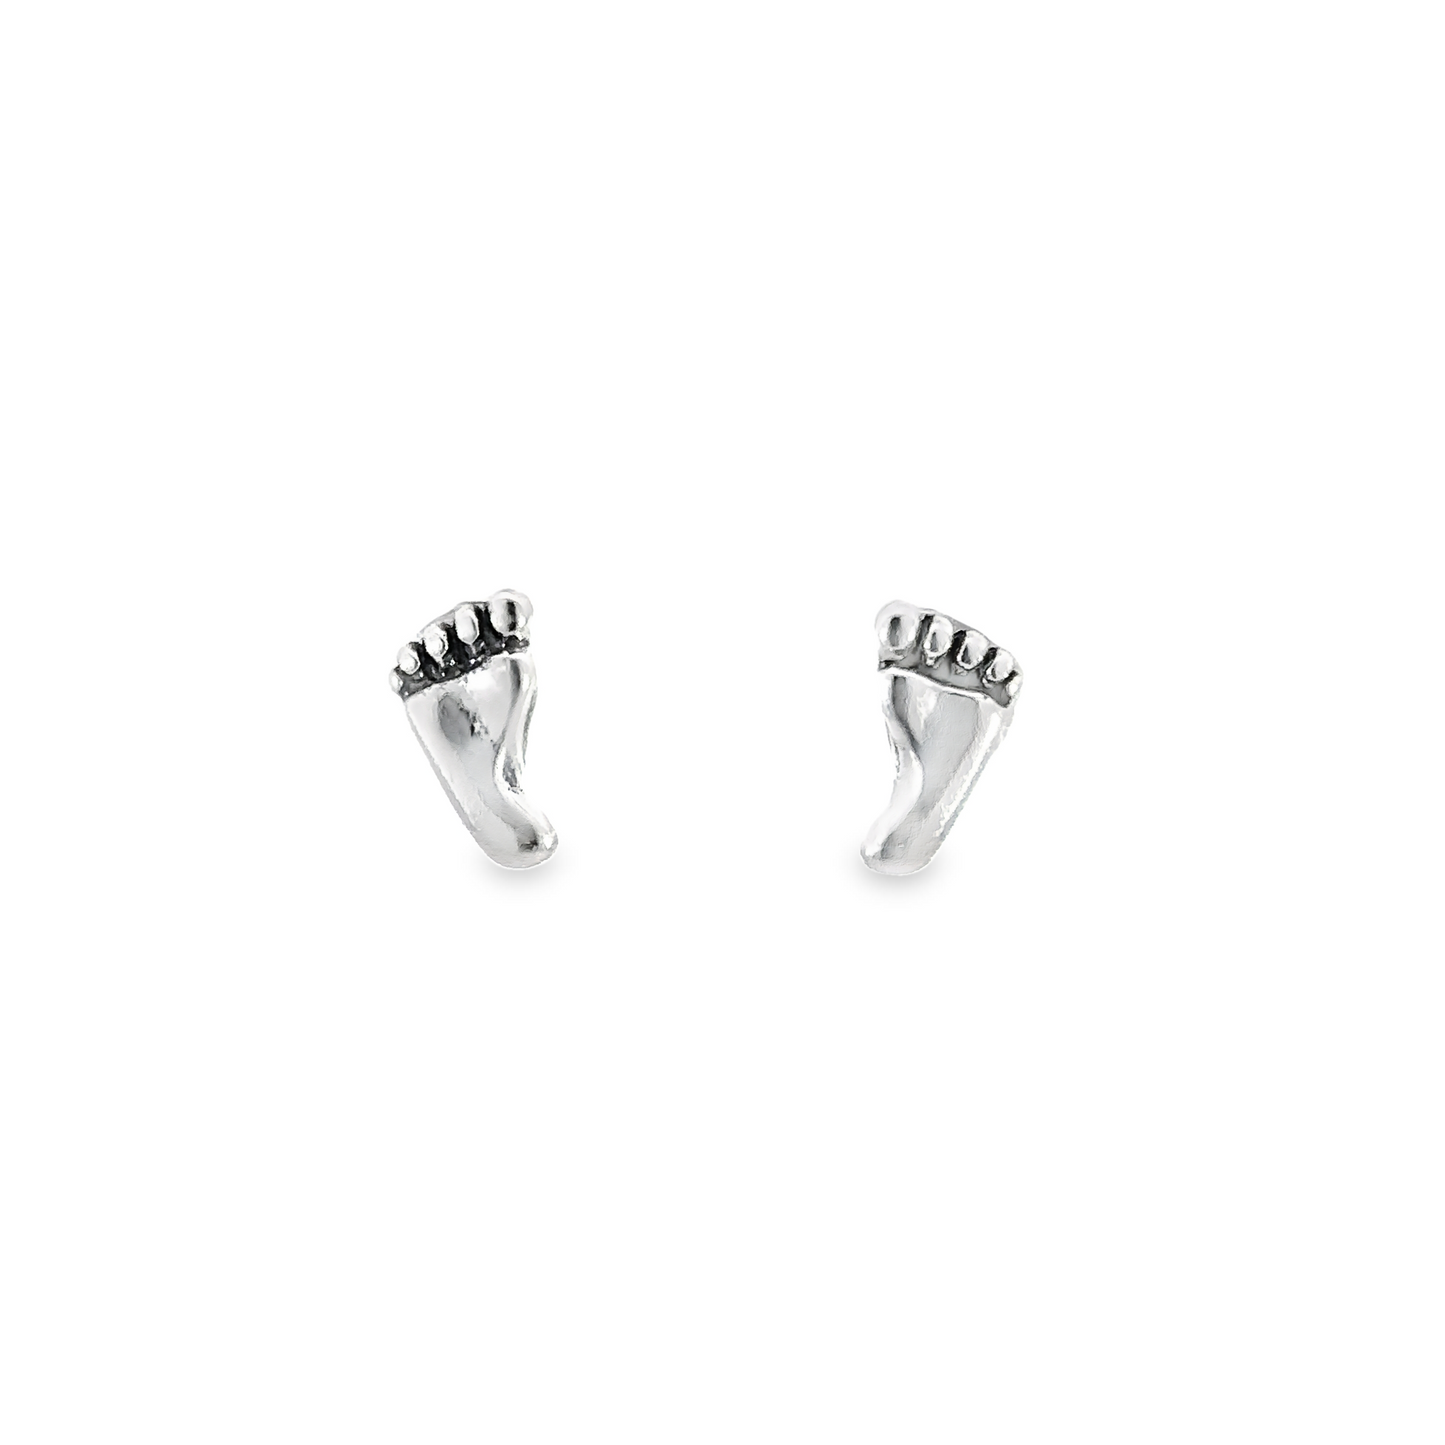 A pair of Foot Studs, an eccentric addition for a unique look.